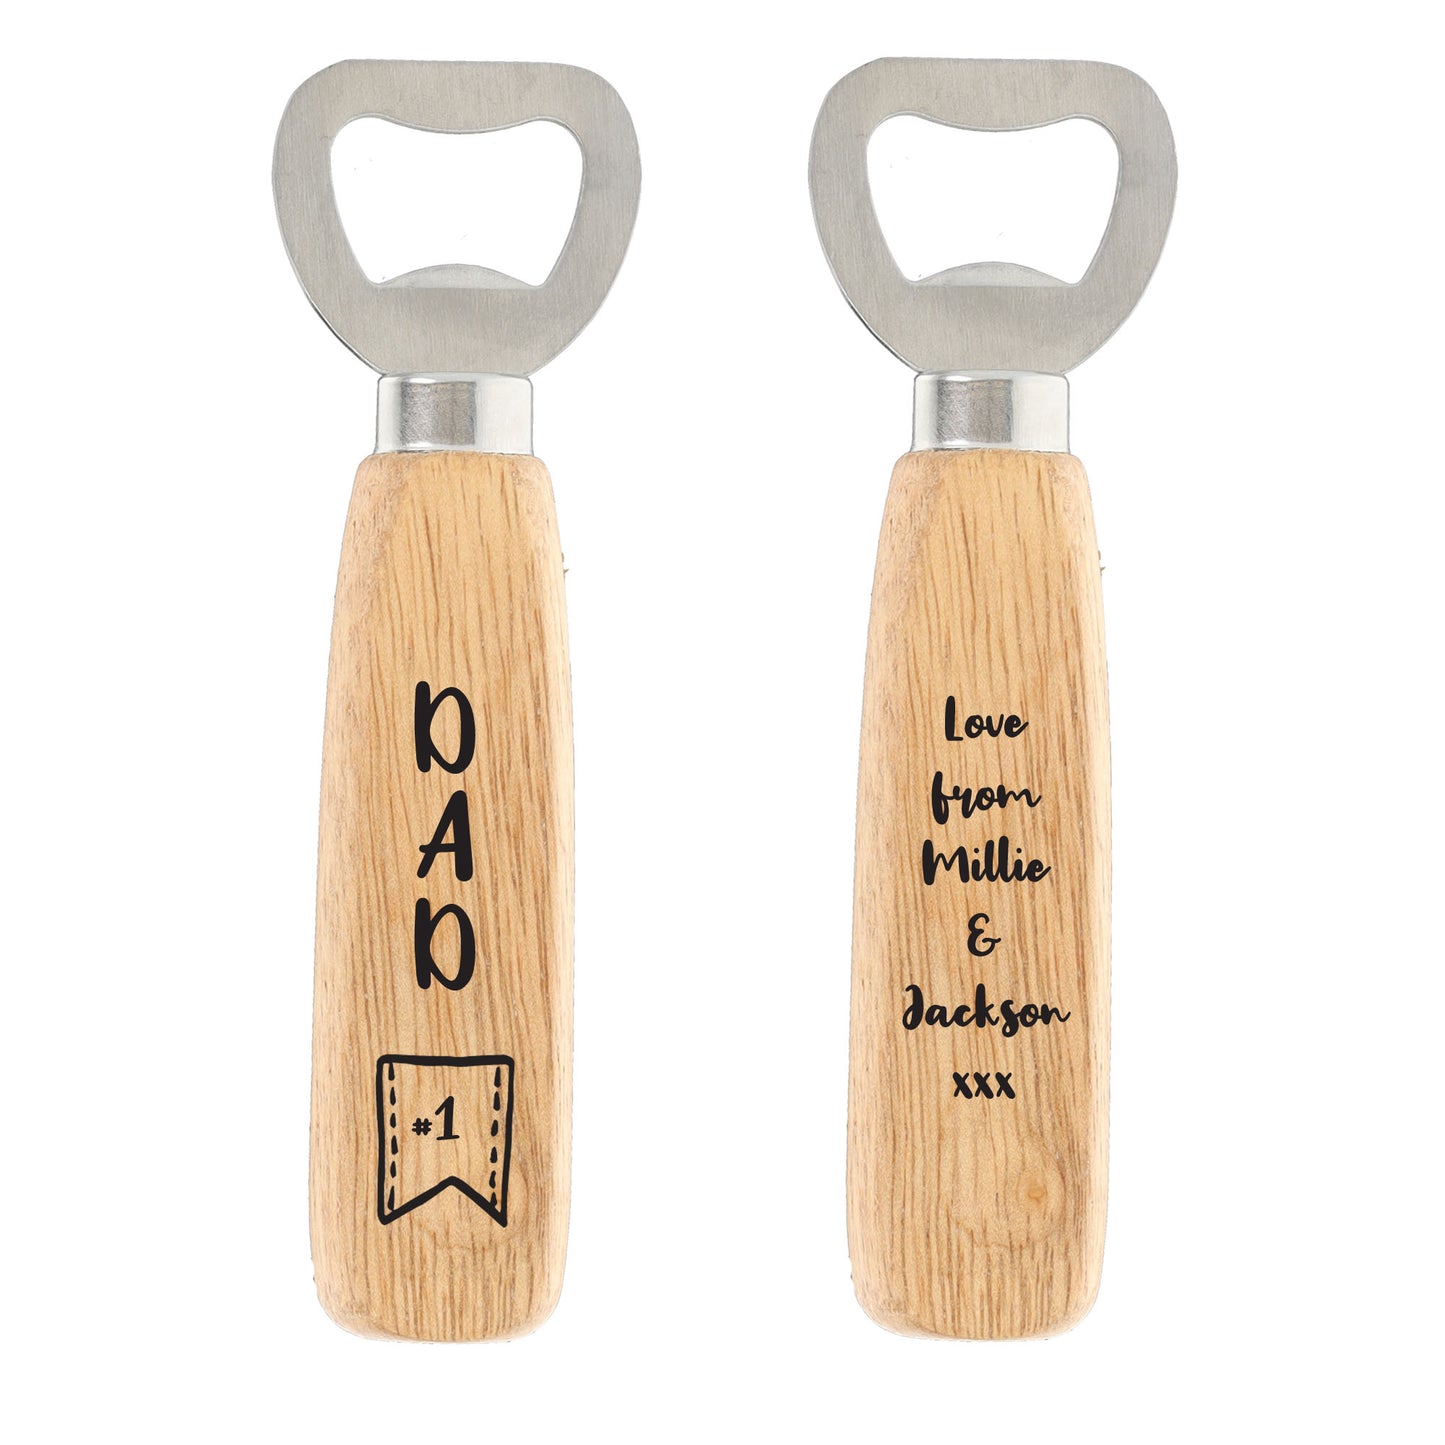 Personalised Engraved Wooden Bottle Opener Fathers Day Gift  - Always Looking Good -   